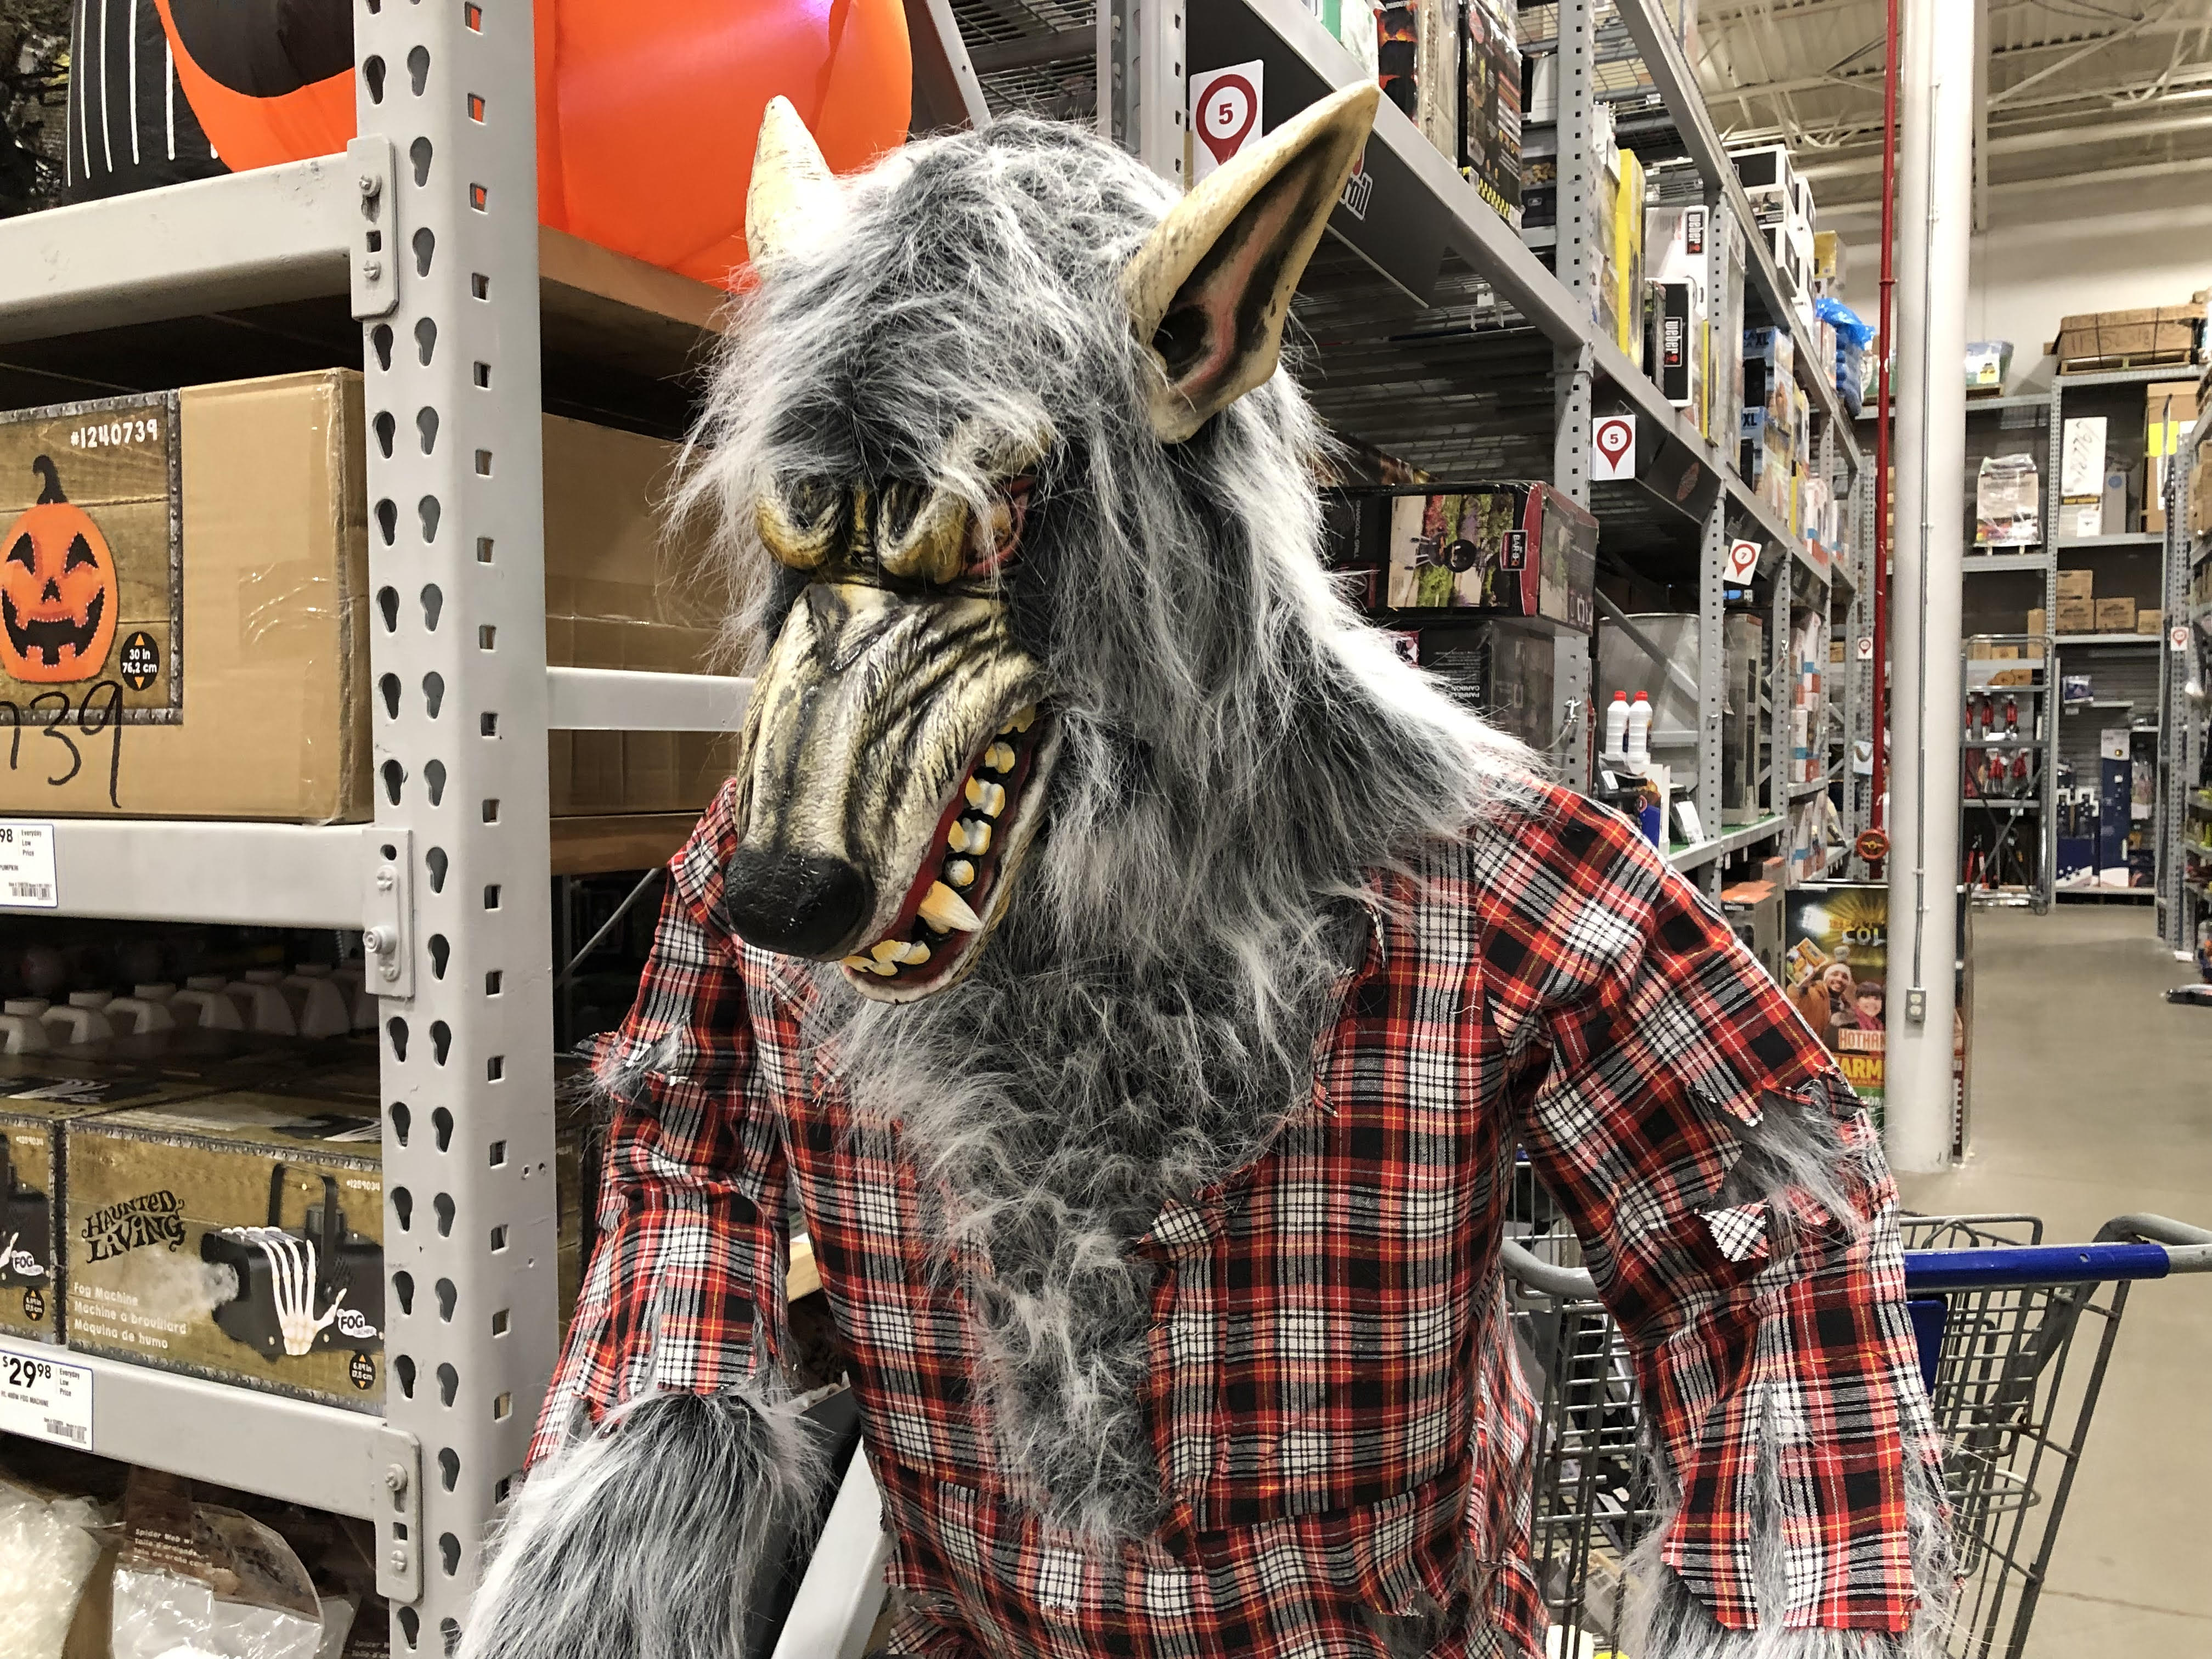 New For 2019: Holiday Living Werewolf From Lowes – AnimatronicHalloween.com